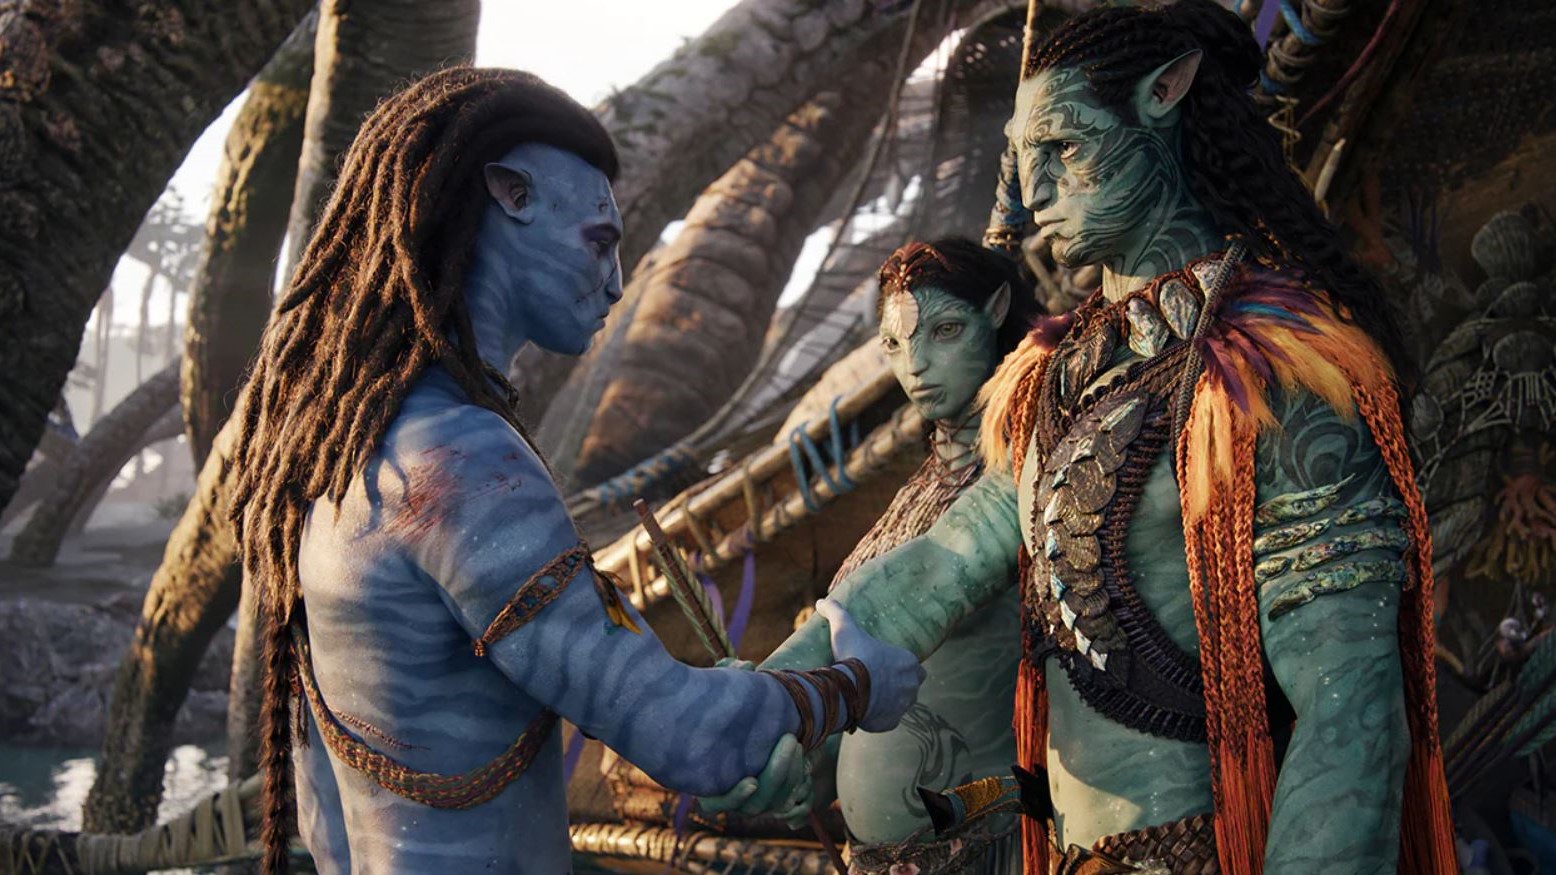 After A Decade, James Cameron Finally Admits That 'Avatar' Is Animated